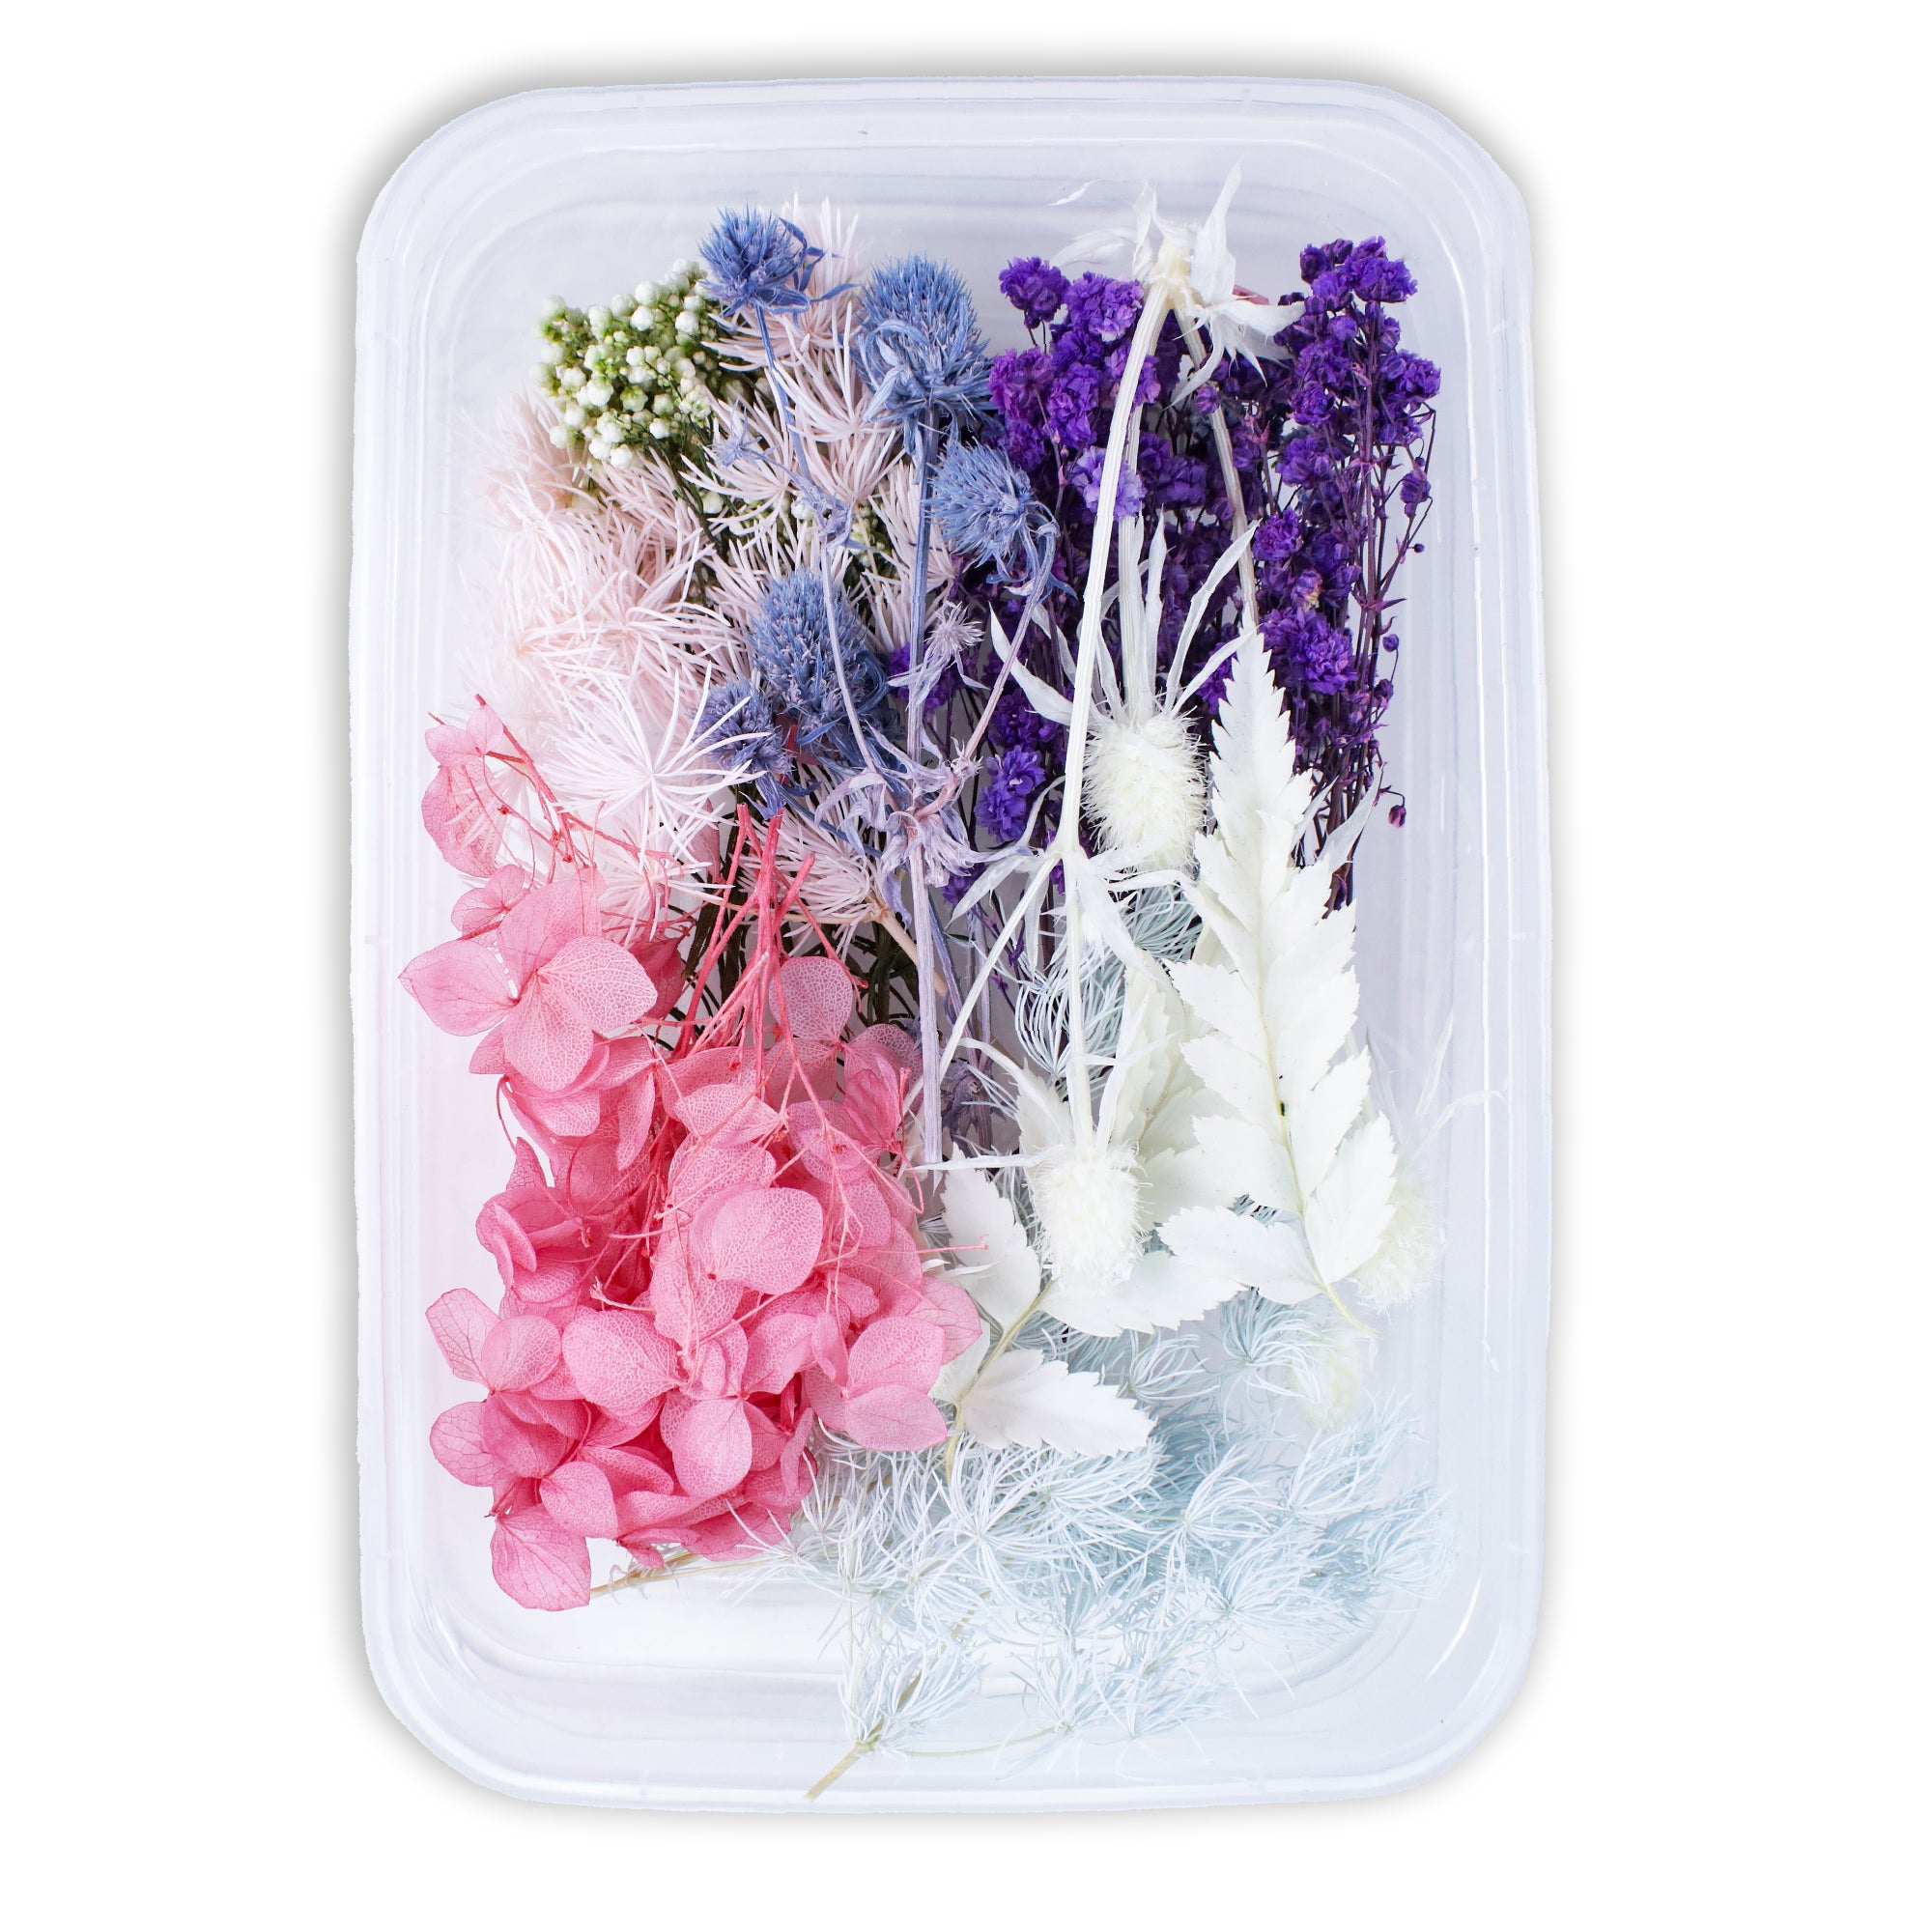 Resin Art Natural Dried Flowers Showy Blossoms 1 Box Ib